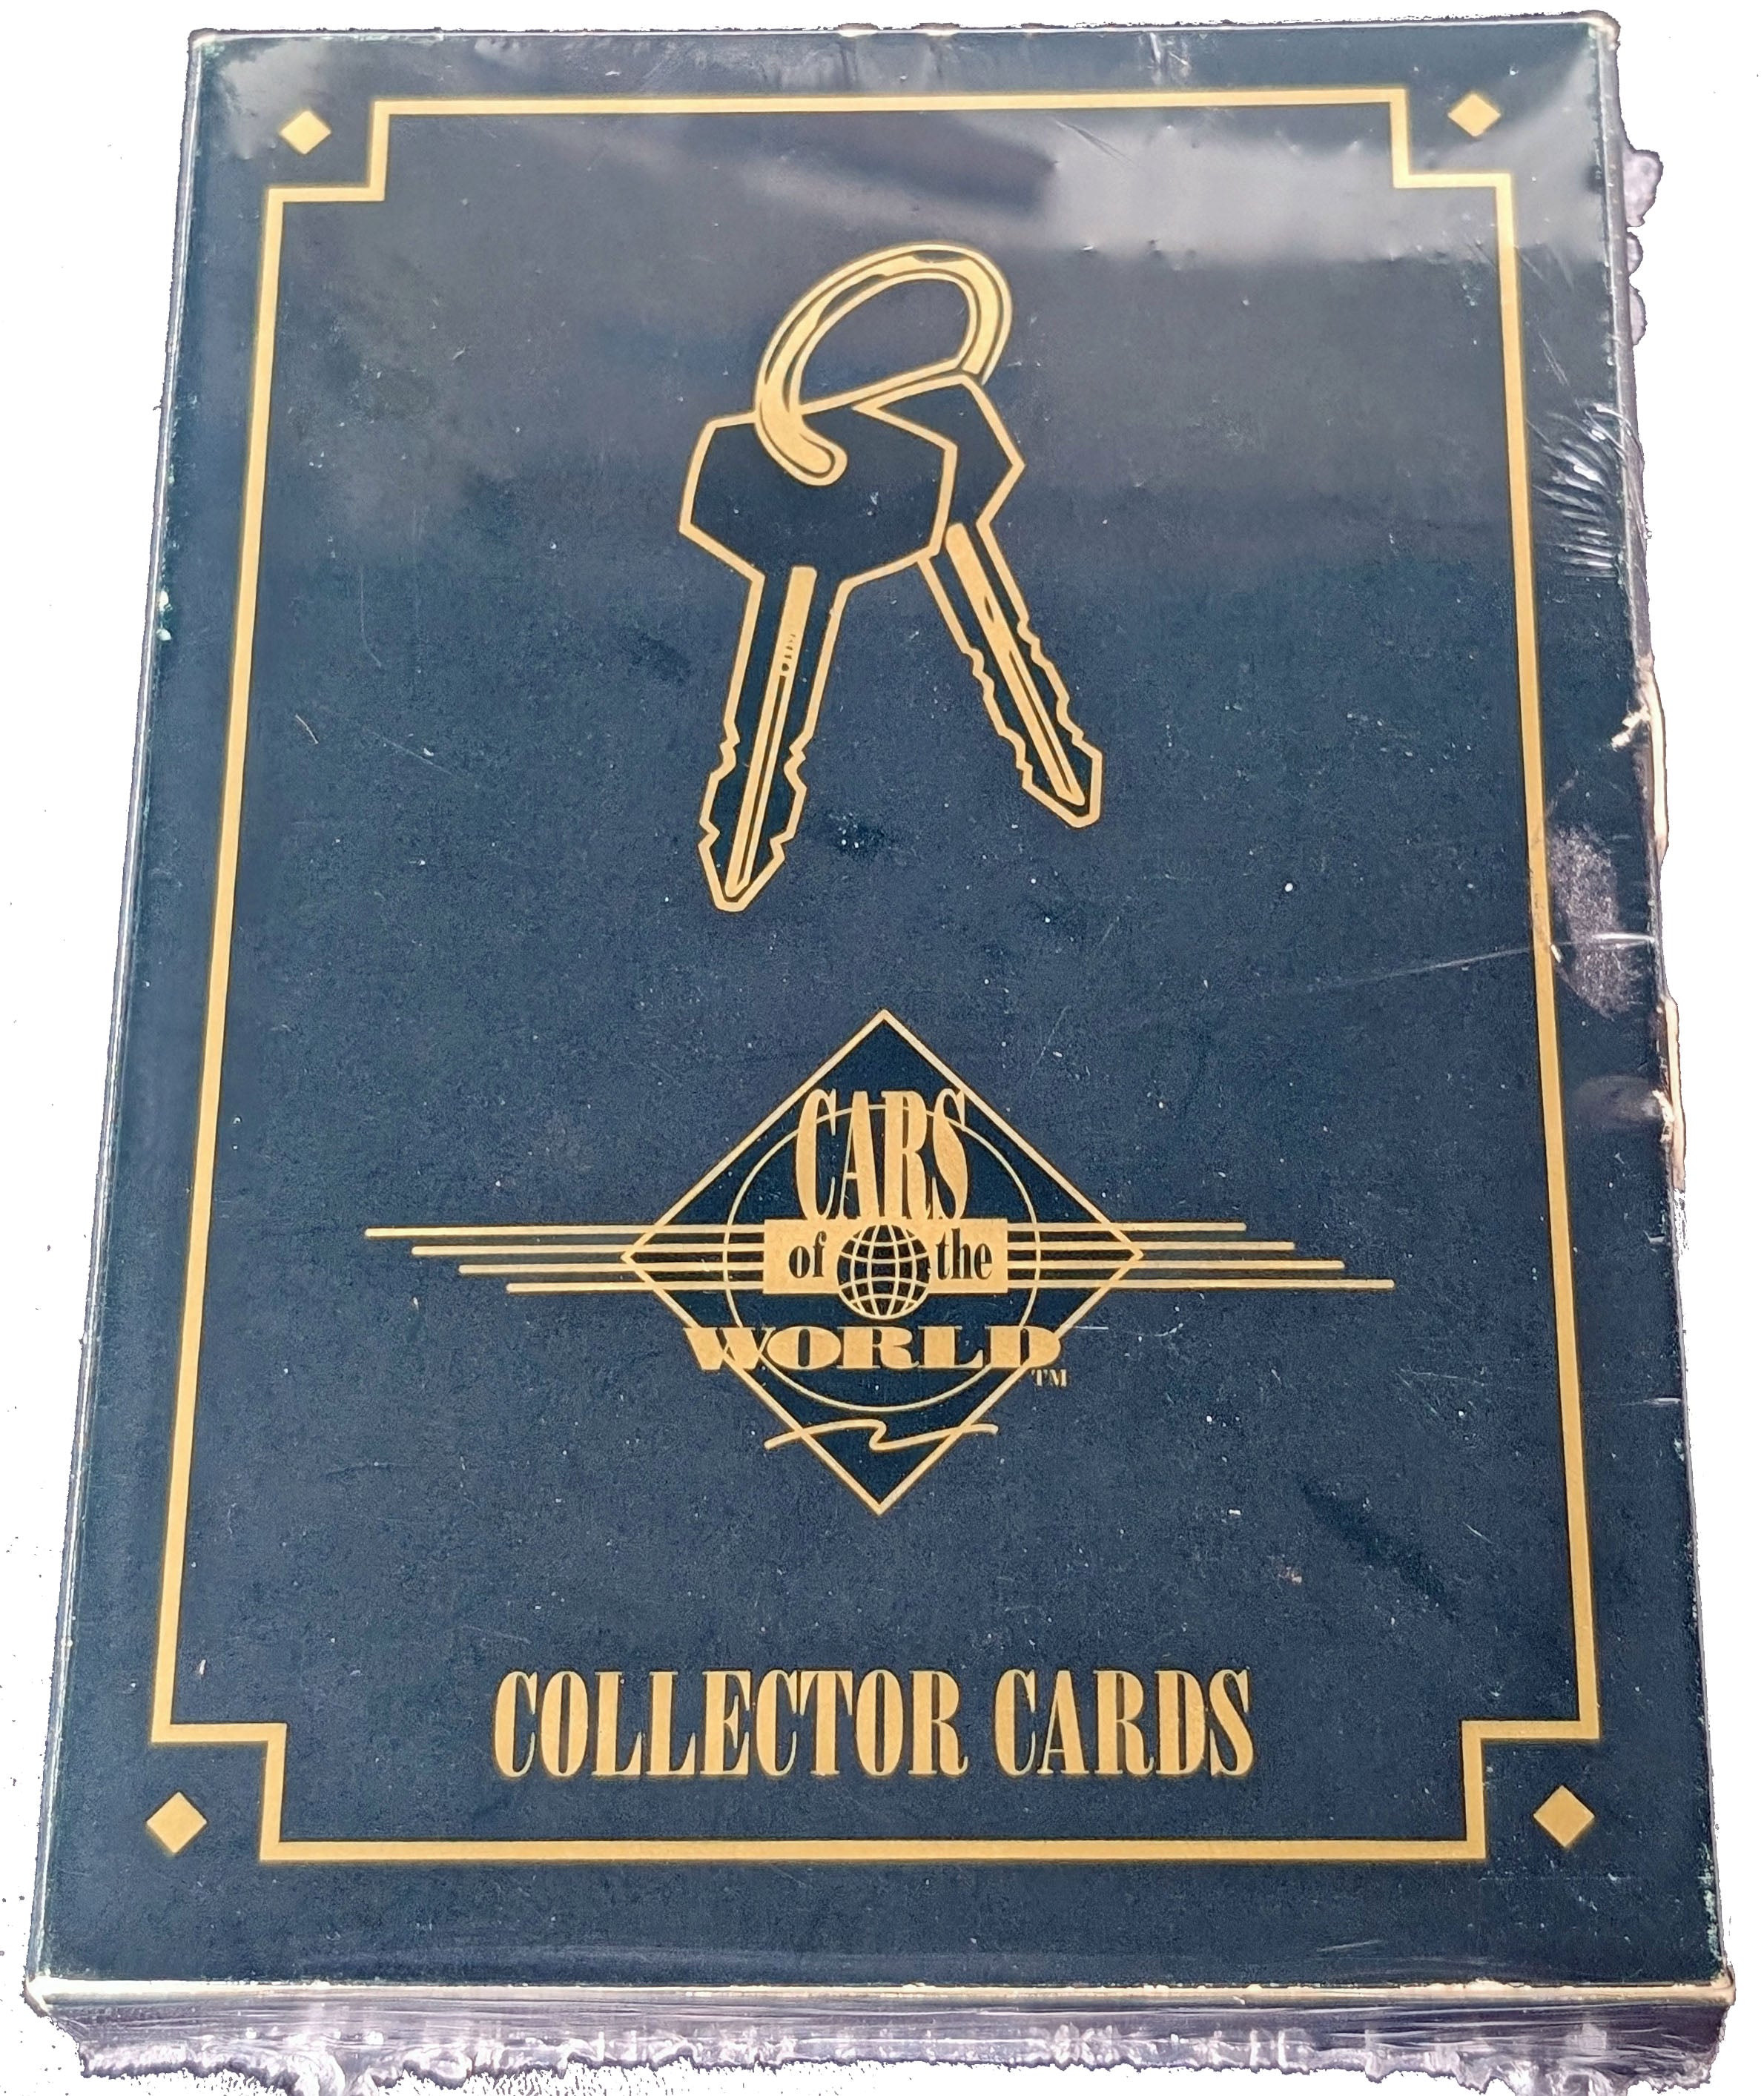 1992 CMK Cars of the World Collector Cards Volume 1 Complete 25 Card Set